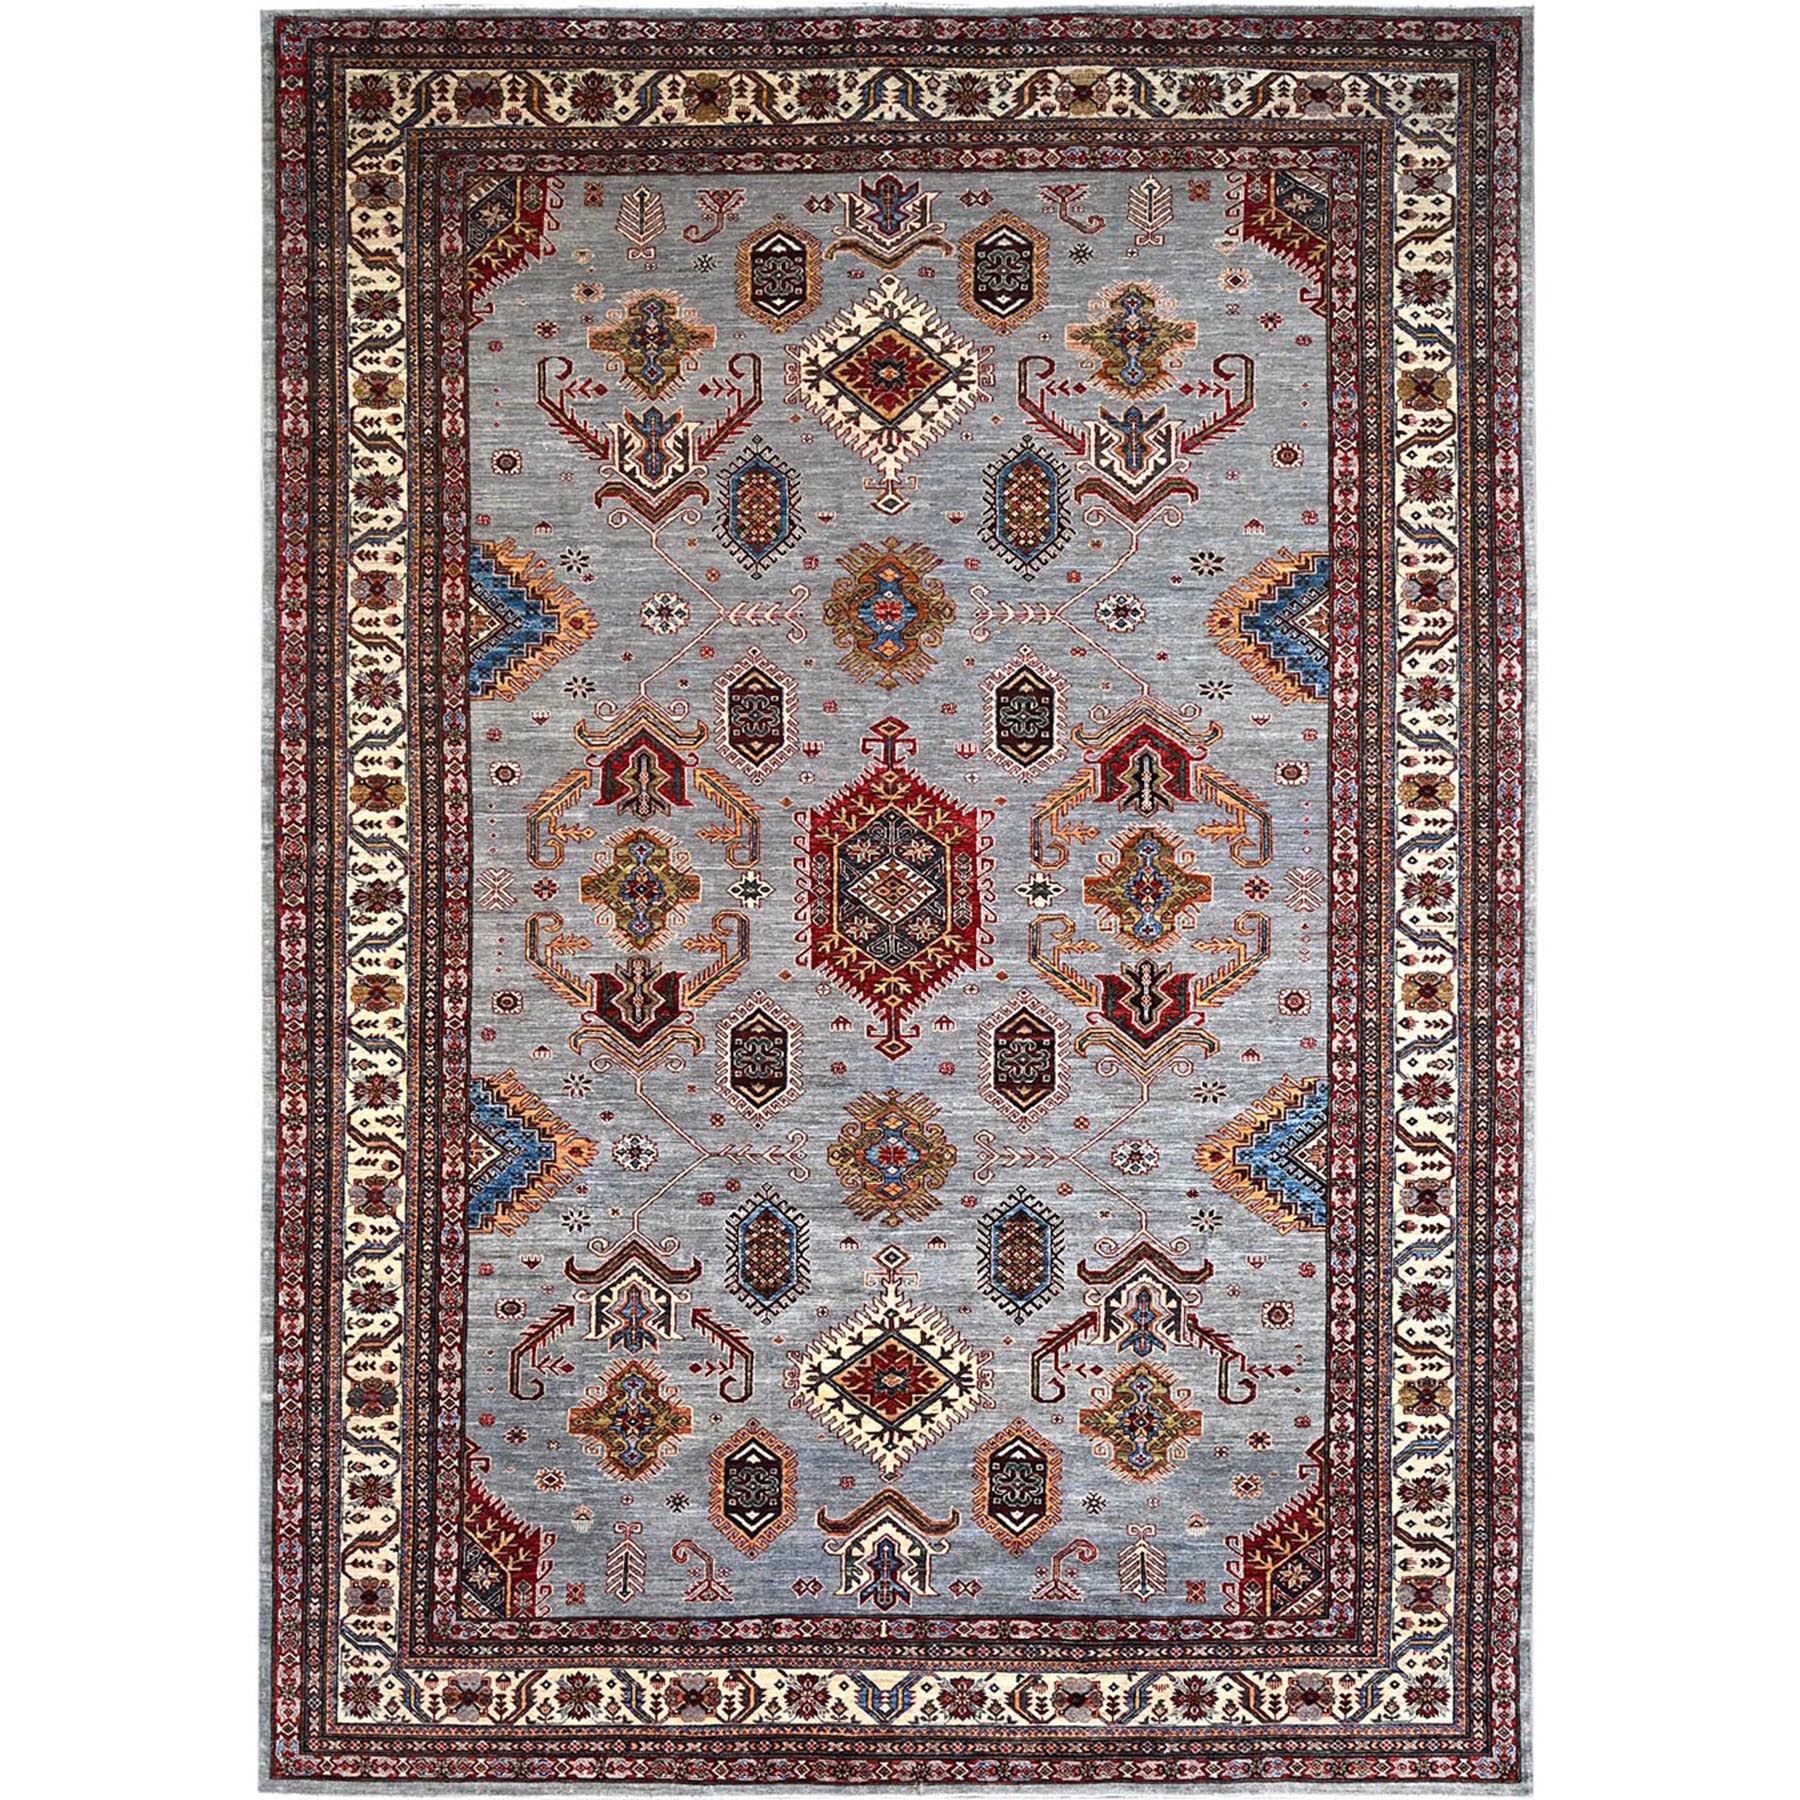 Koala Gray and Dove White, Afghan Super Kazak with Geometric Medallions Design, Hand Knotted, Pure Wool, Denser Weave, Oriental Rug